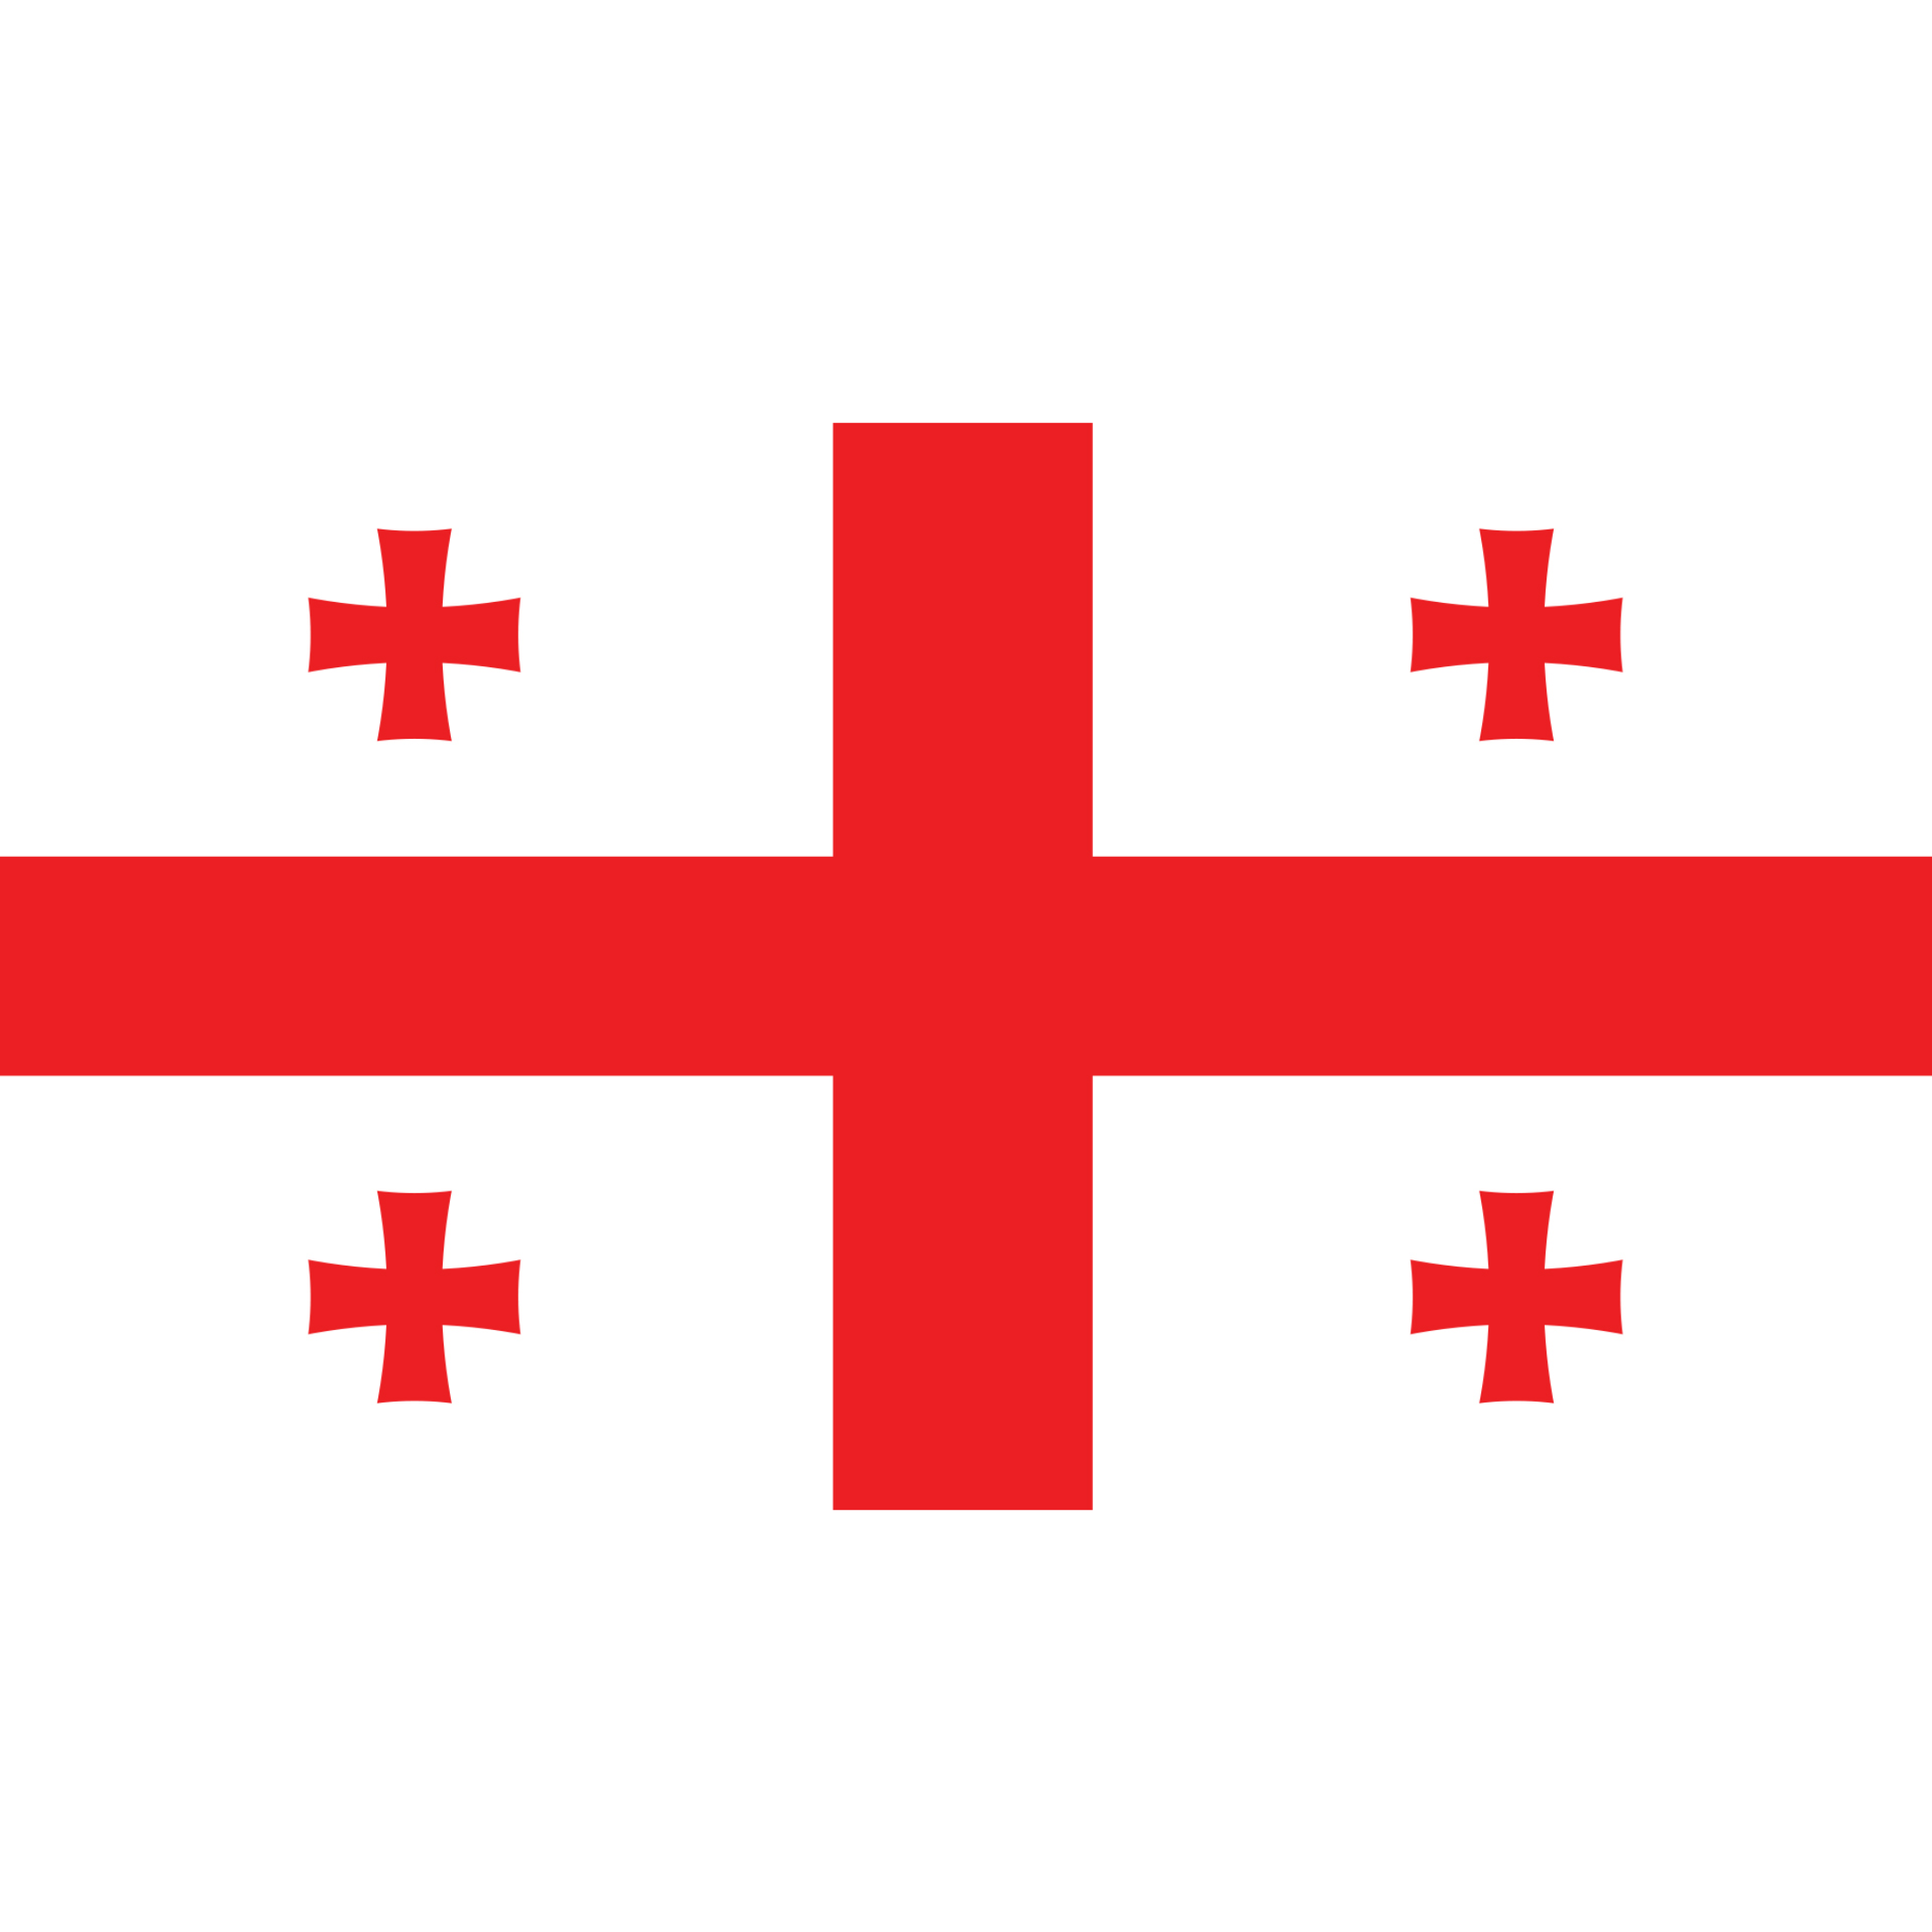 The flag of Georgia has a white background with a large red cross in the centre and a smaller red cross in each quarter.